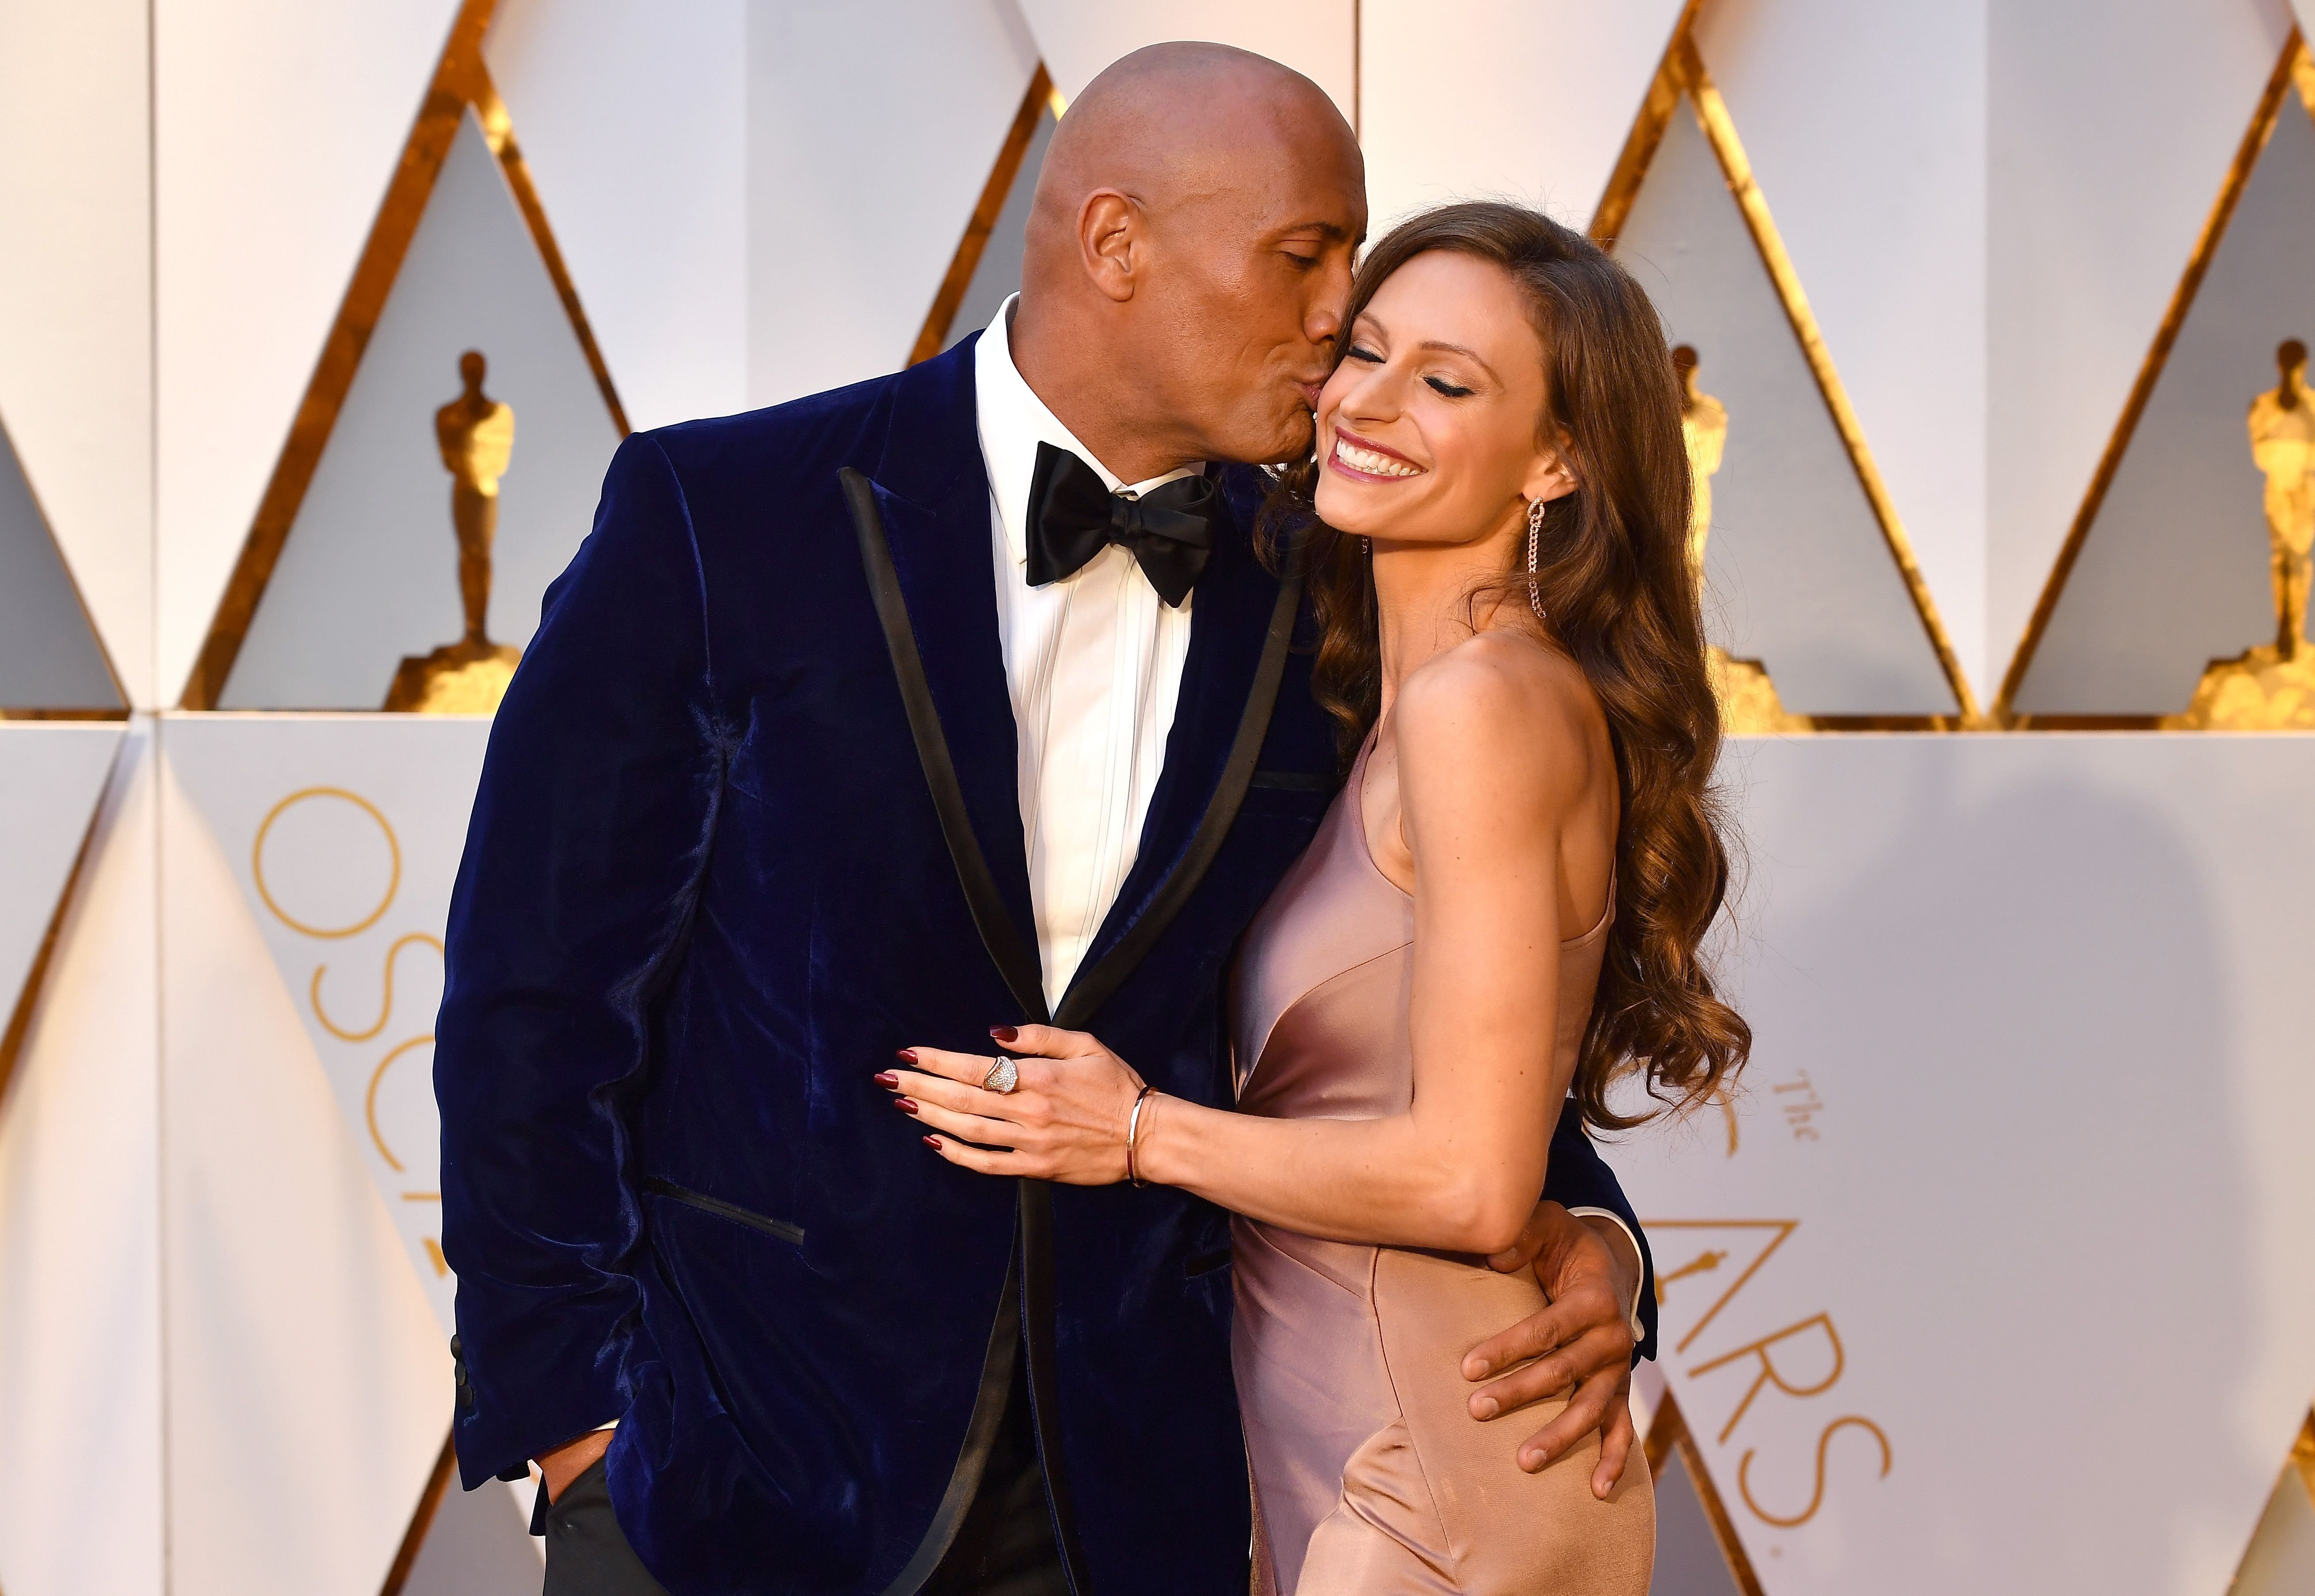 Dwayne Johnson and Lauren Hashian at the 89th Annual Academy Awards in Hollywood, California | Photo: Jeff Kravitz/FilmMagic/Getty Images